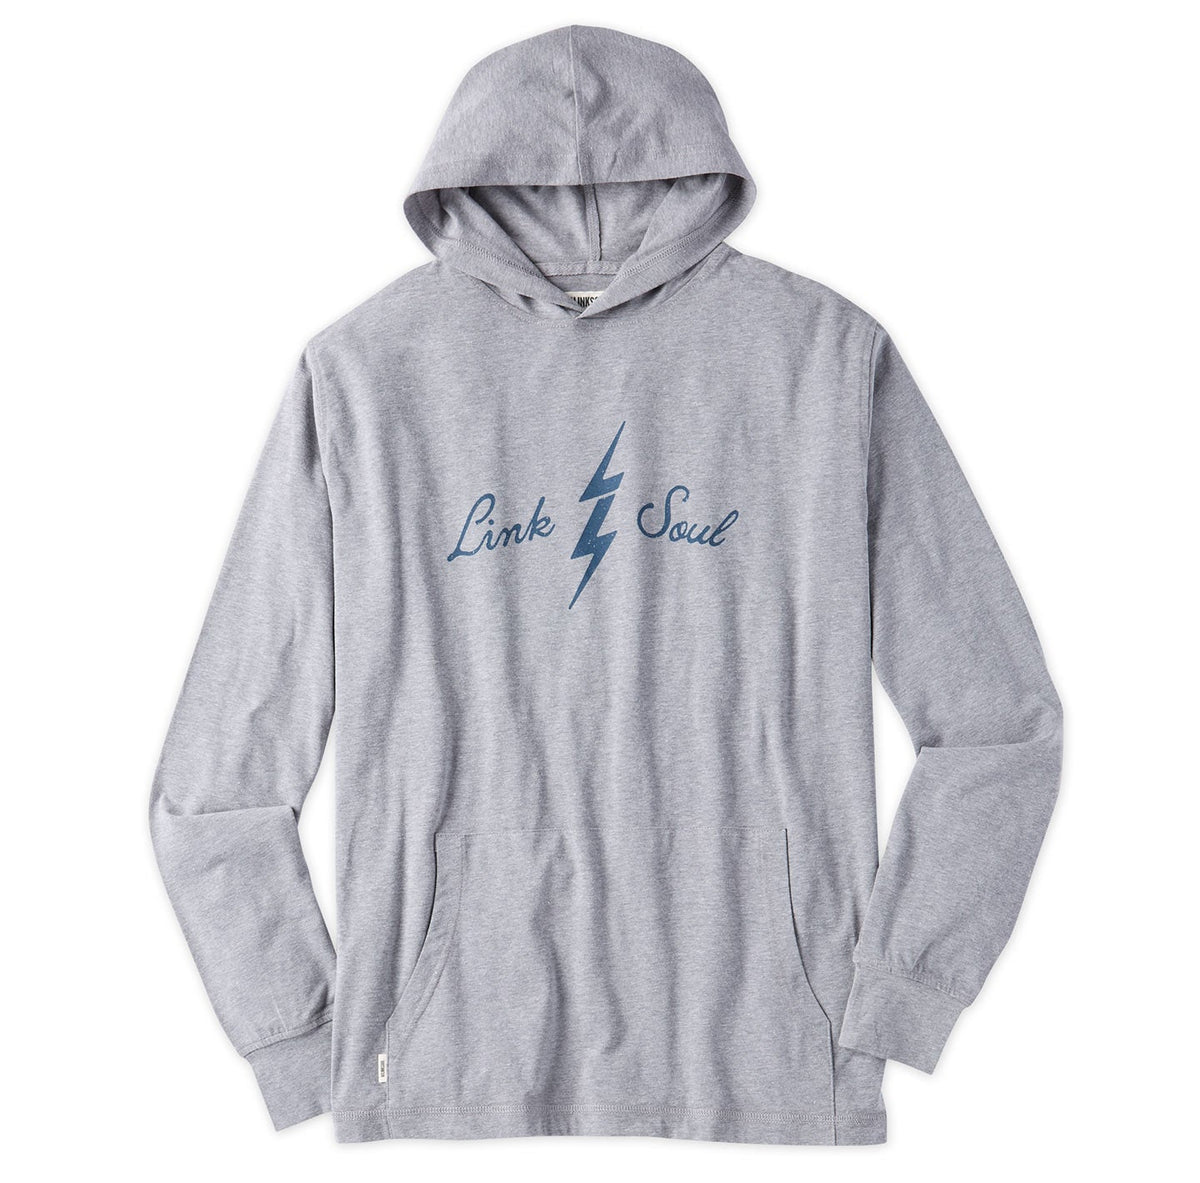 The SD Bolts Hoodie